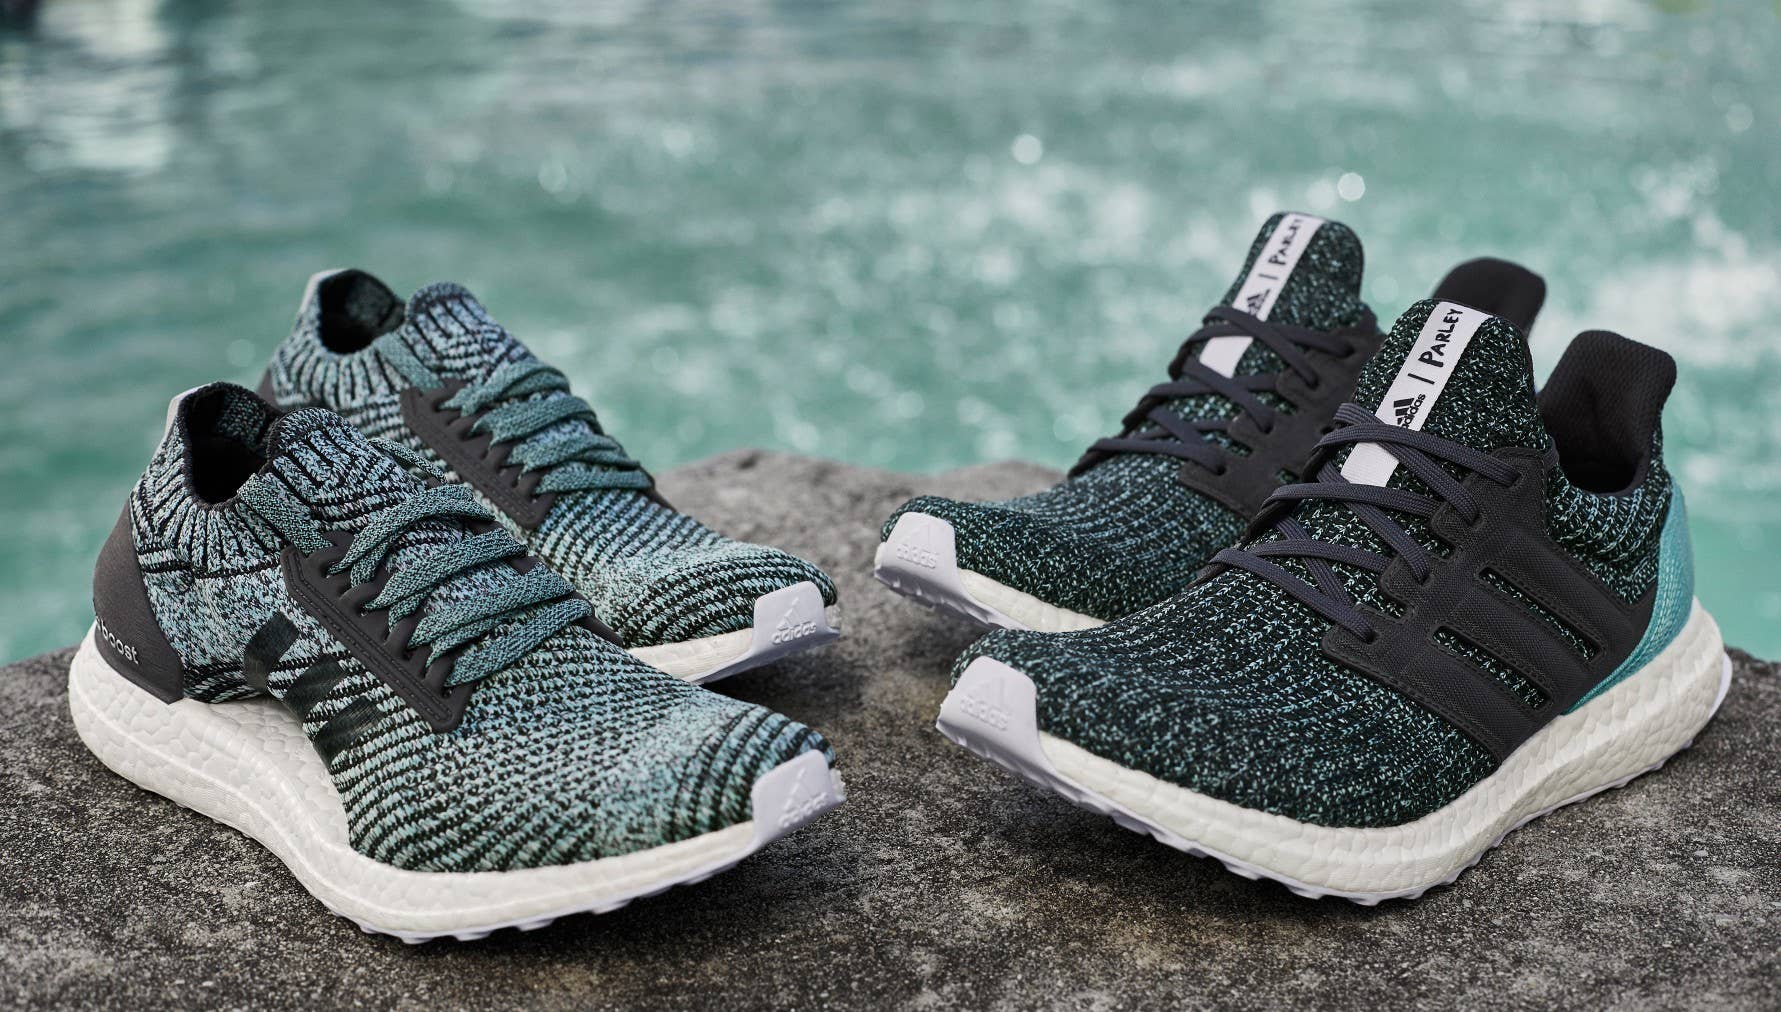 Parley x Adidas Ultra Boost and Ultra Boost X